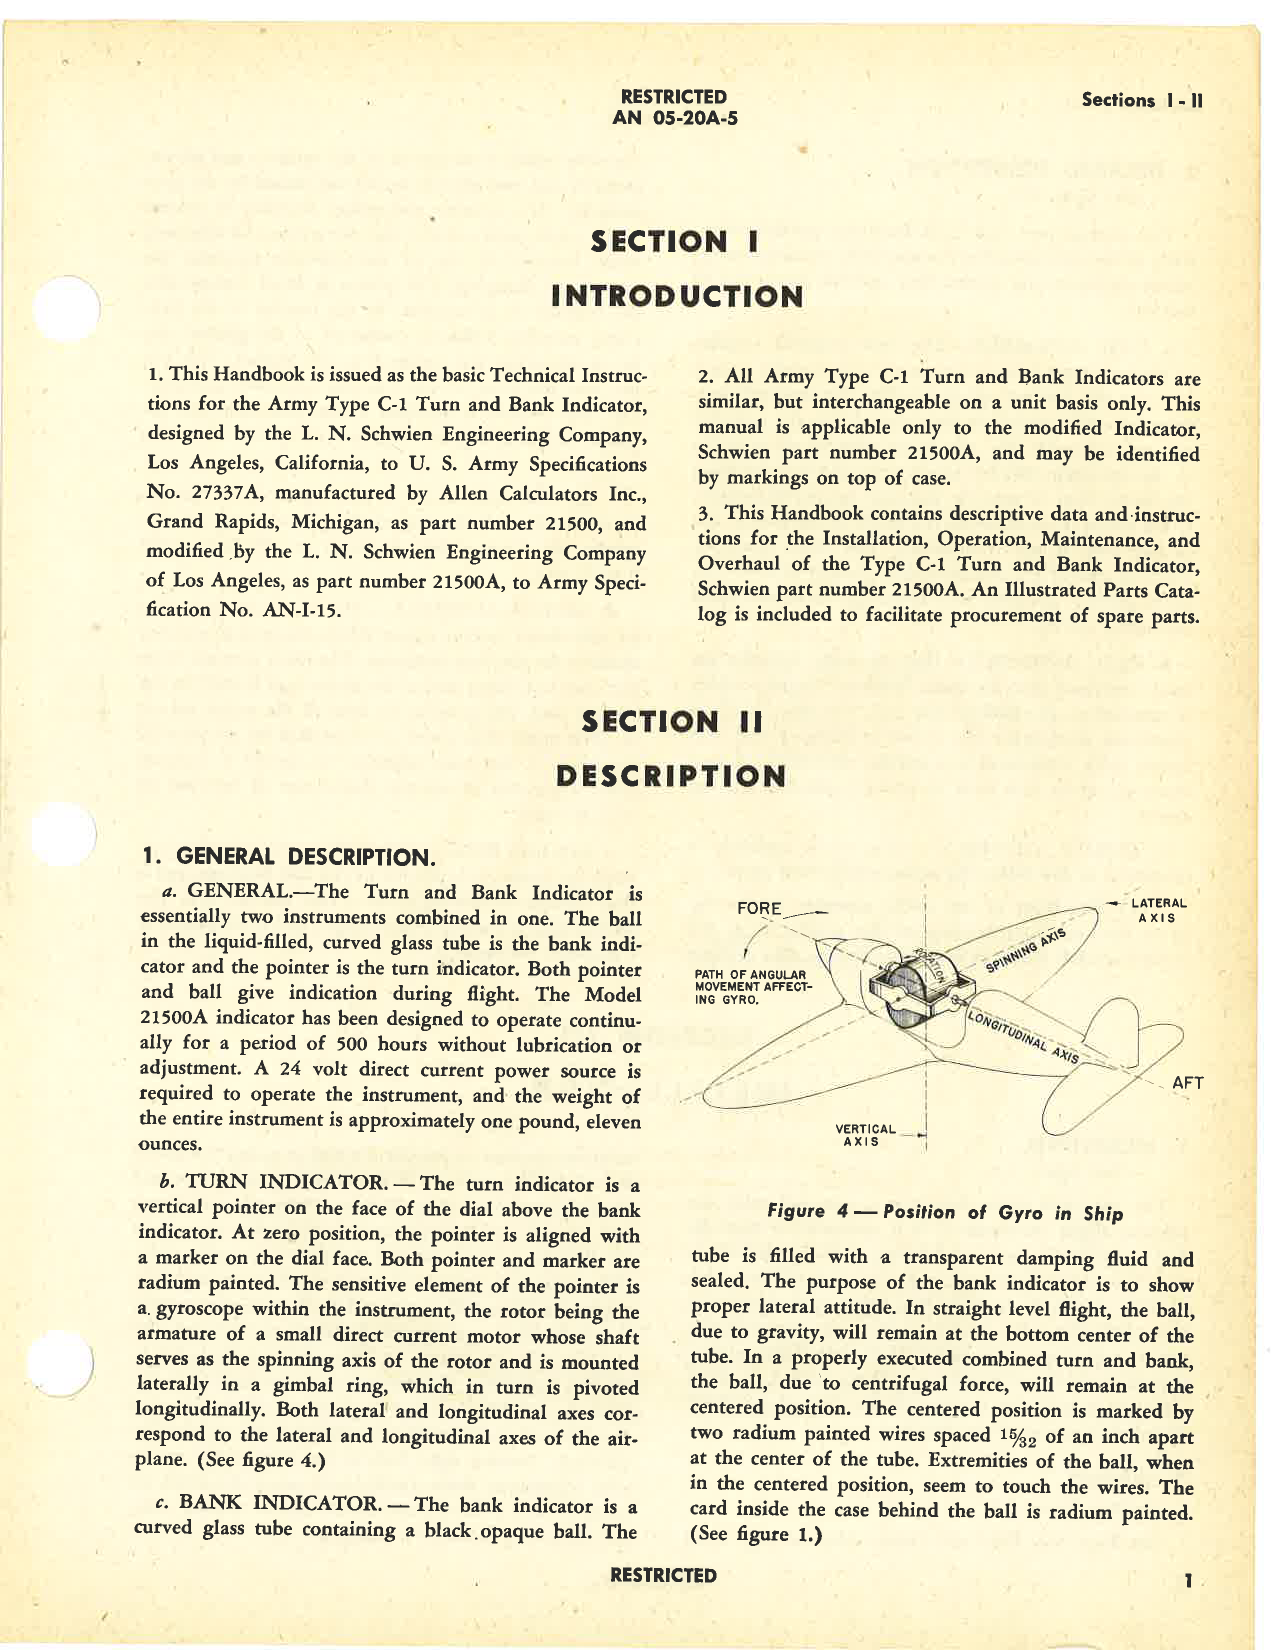 Sample page 7 from AirCorps Library document: Handbook of Instructions with Parts Catalog for Bank and Turn Indicator Type C-1 (Schwien PN 21500A)